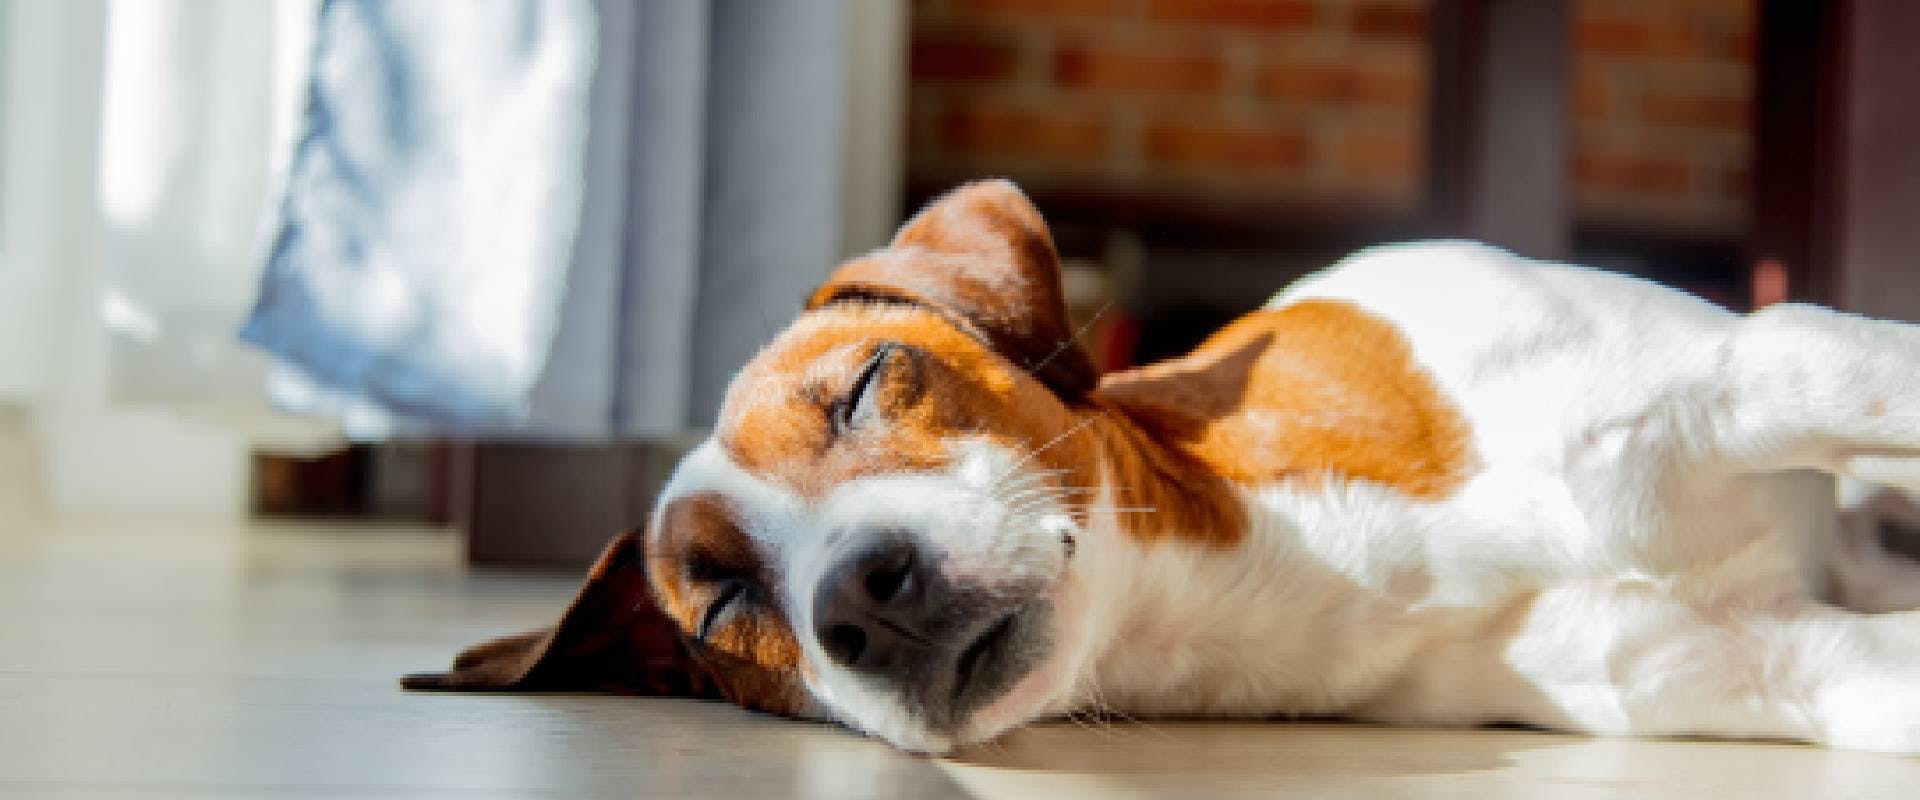 Jack Russell dog sleeping in the sun